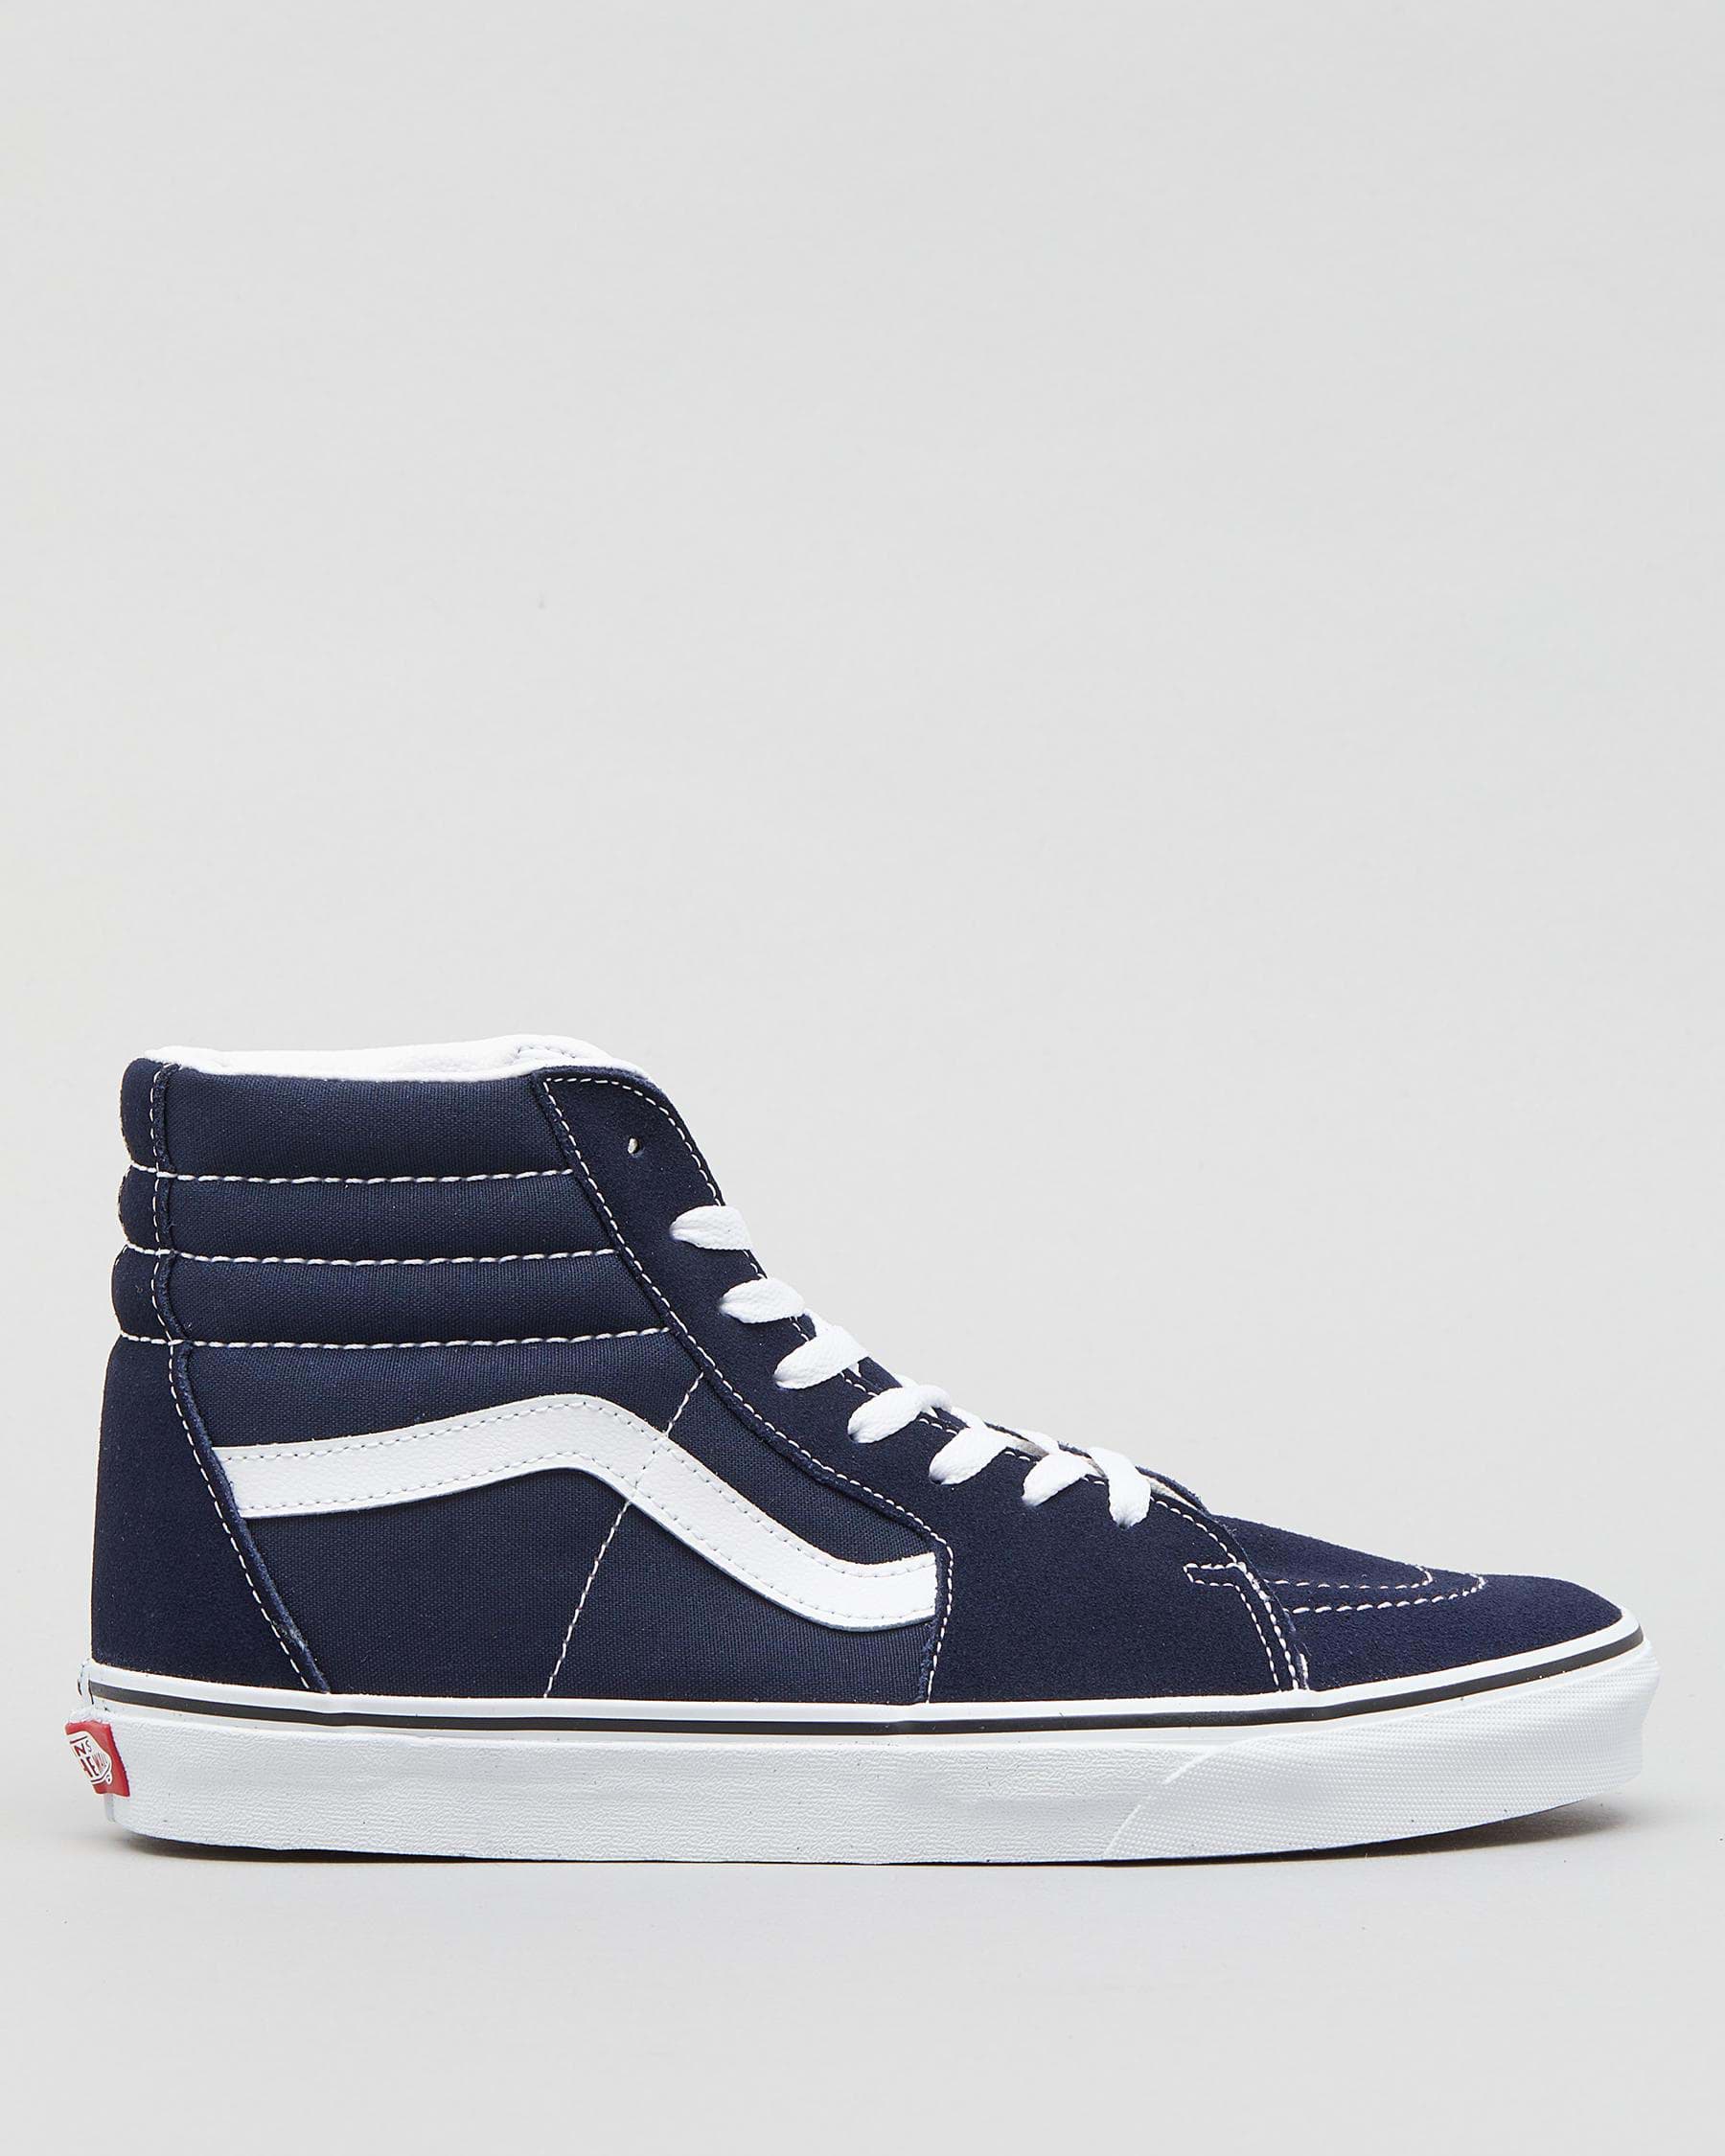 Vans Sk8-Hi Shoes In Parisian Night/true White - Fast Shipping & Easy ...